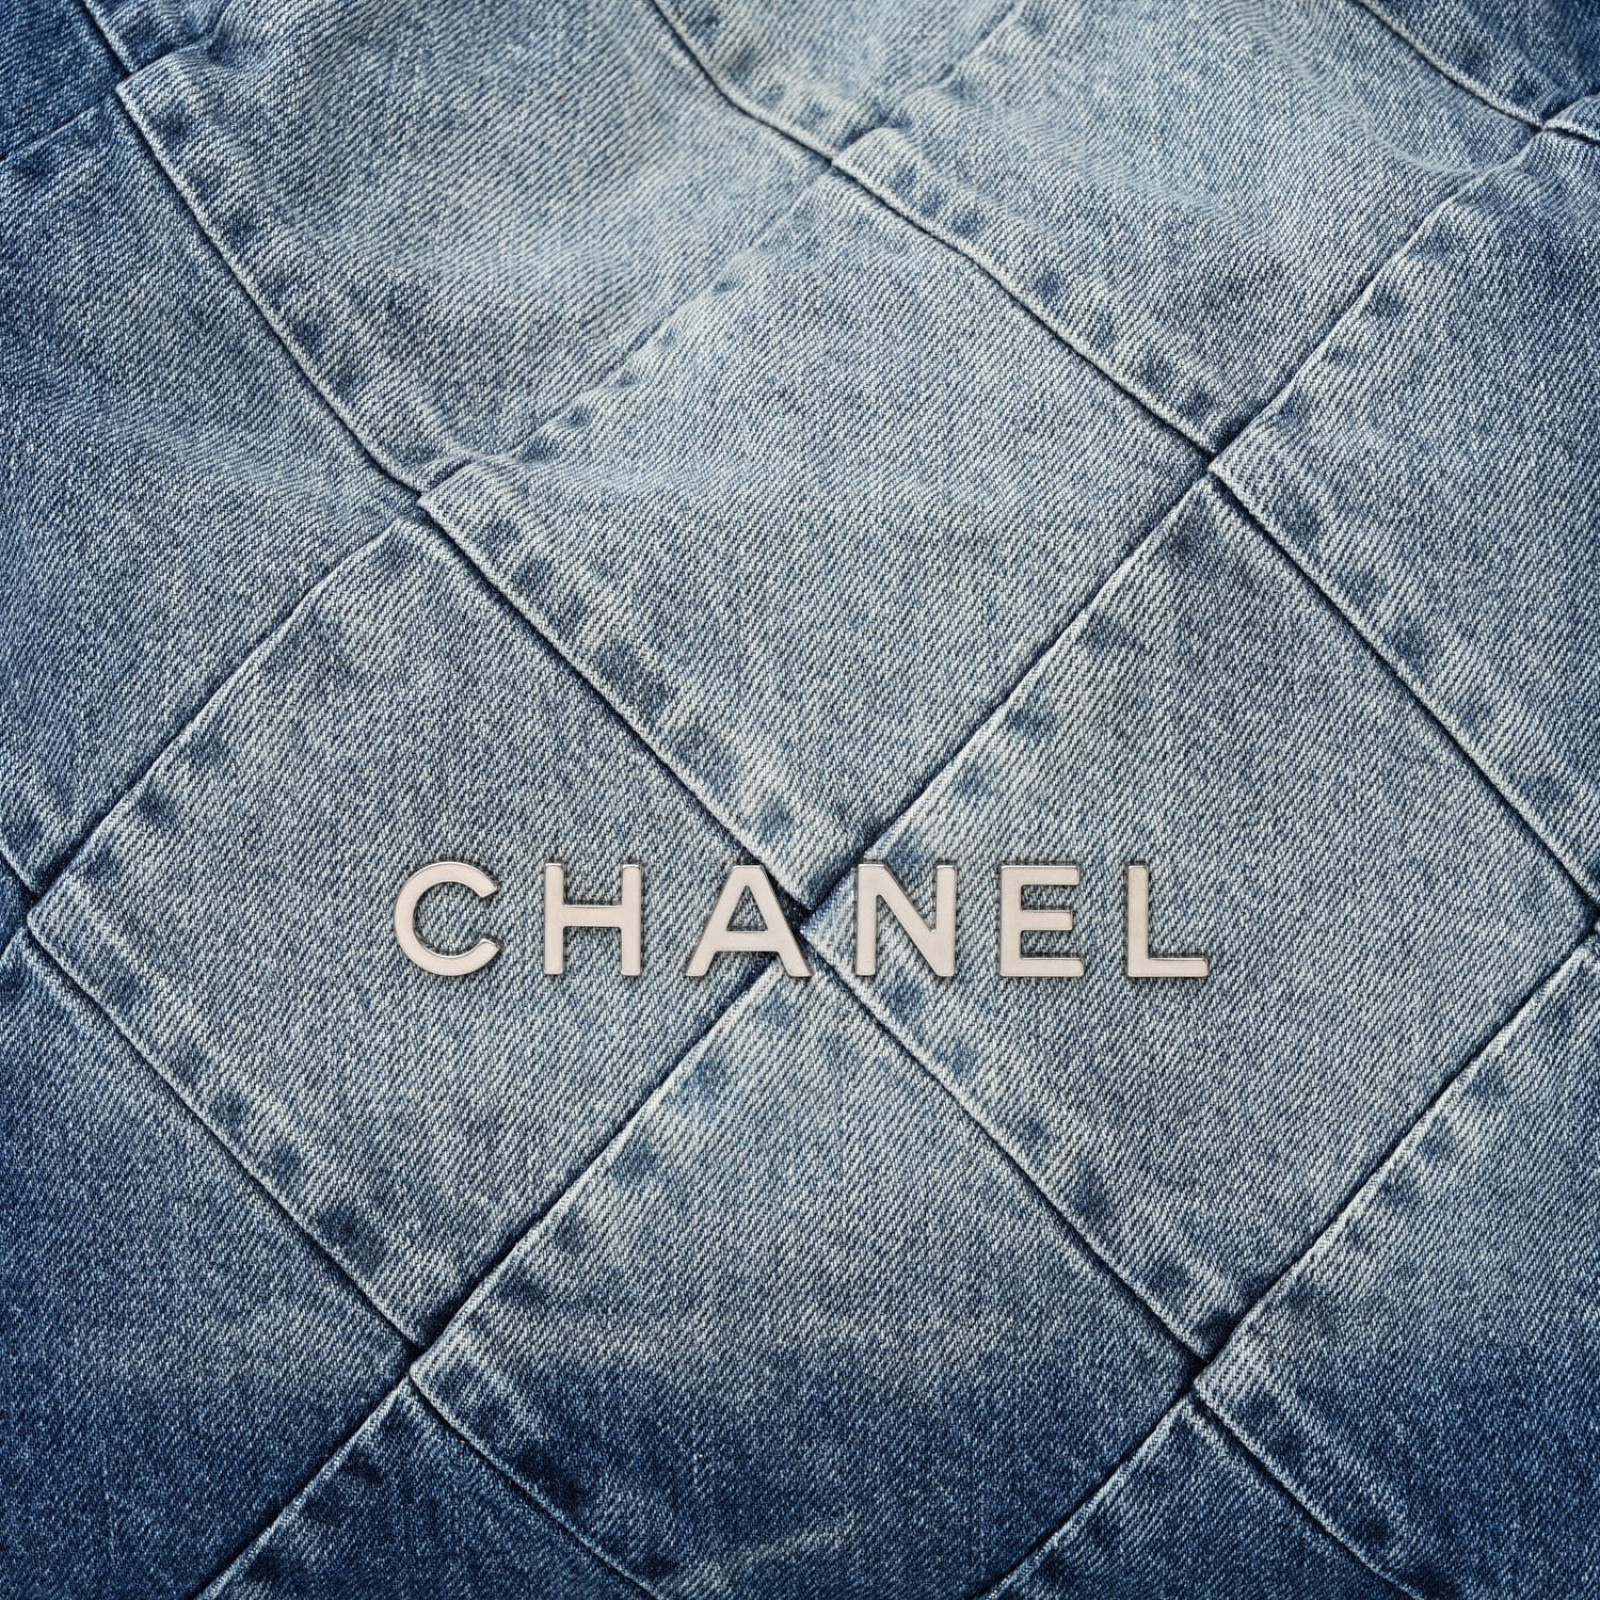 Denim Quilted Chanel 22 Small Bag